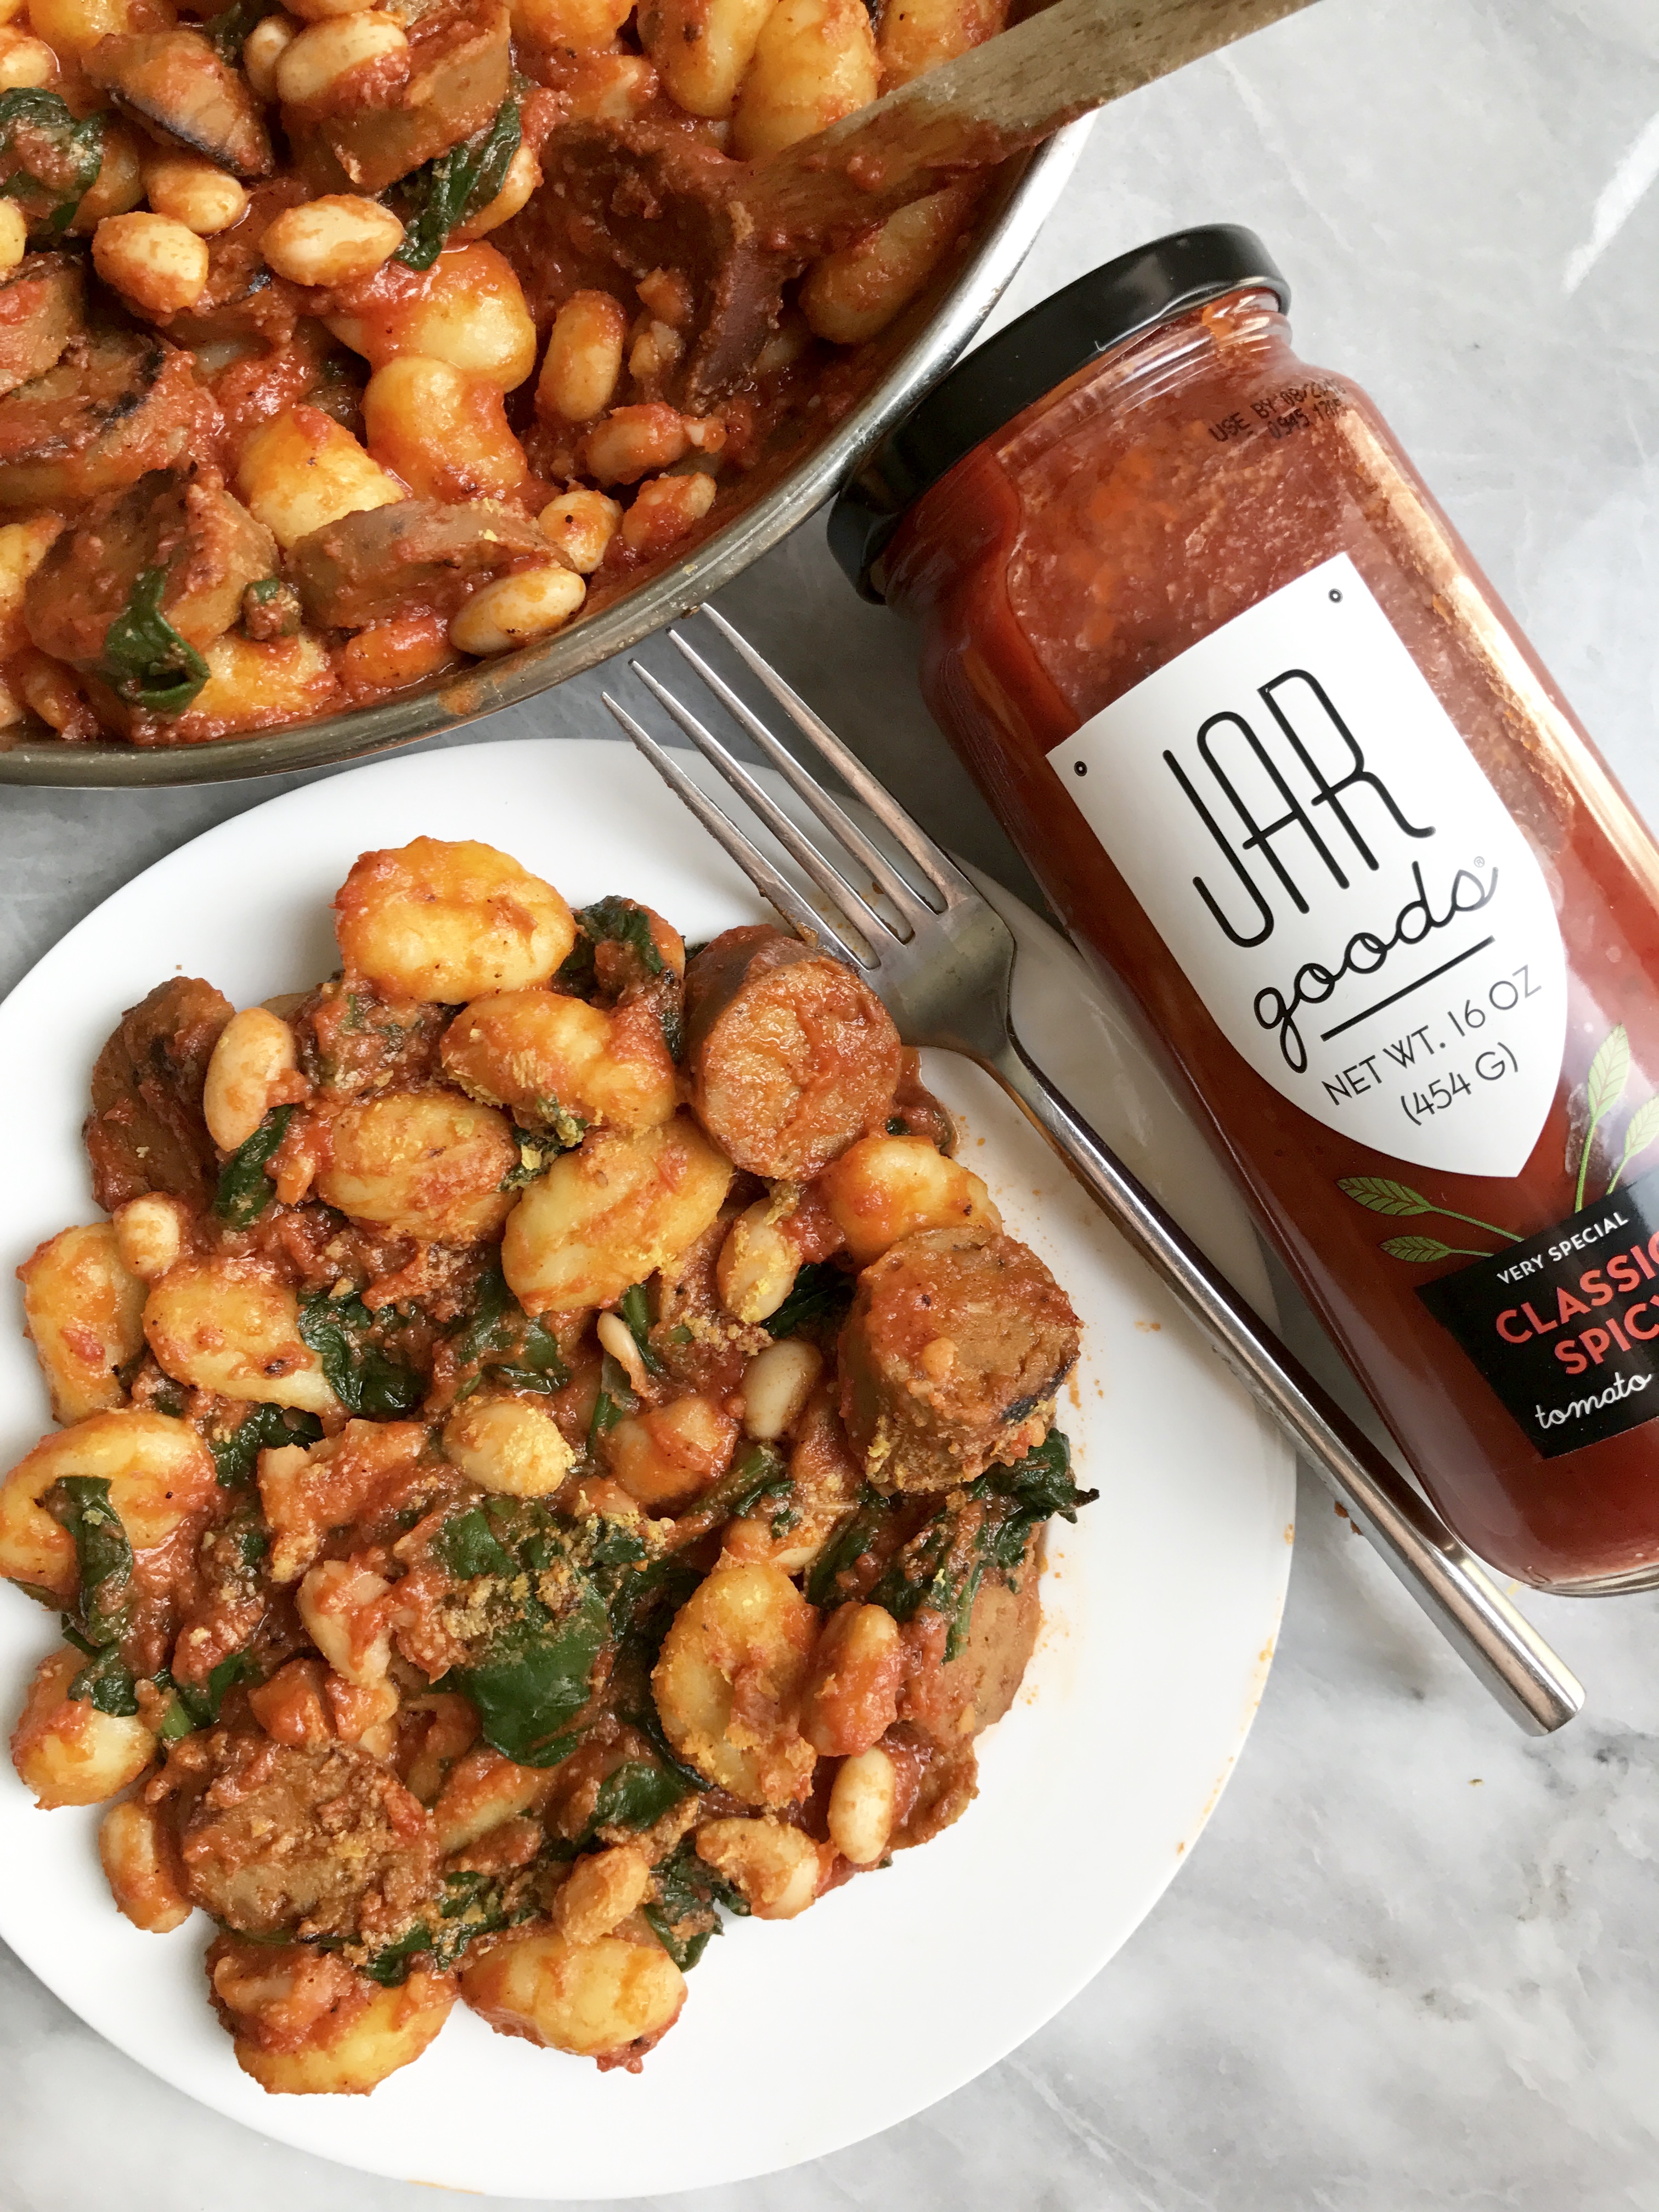 Spicy Tomato Gnocchi With White Beans, Spinach & Vegan Sausage